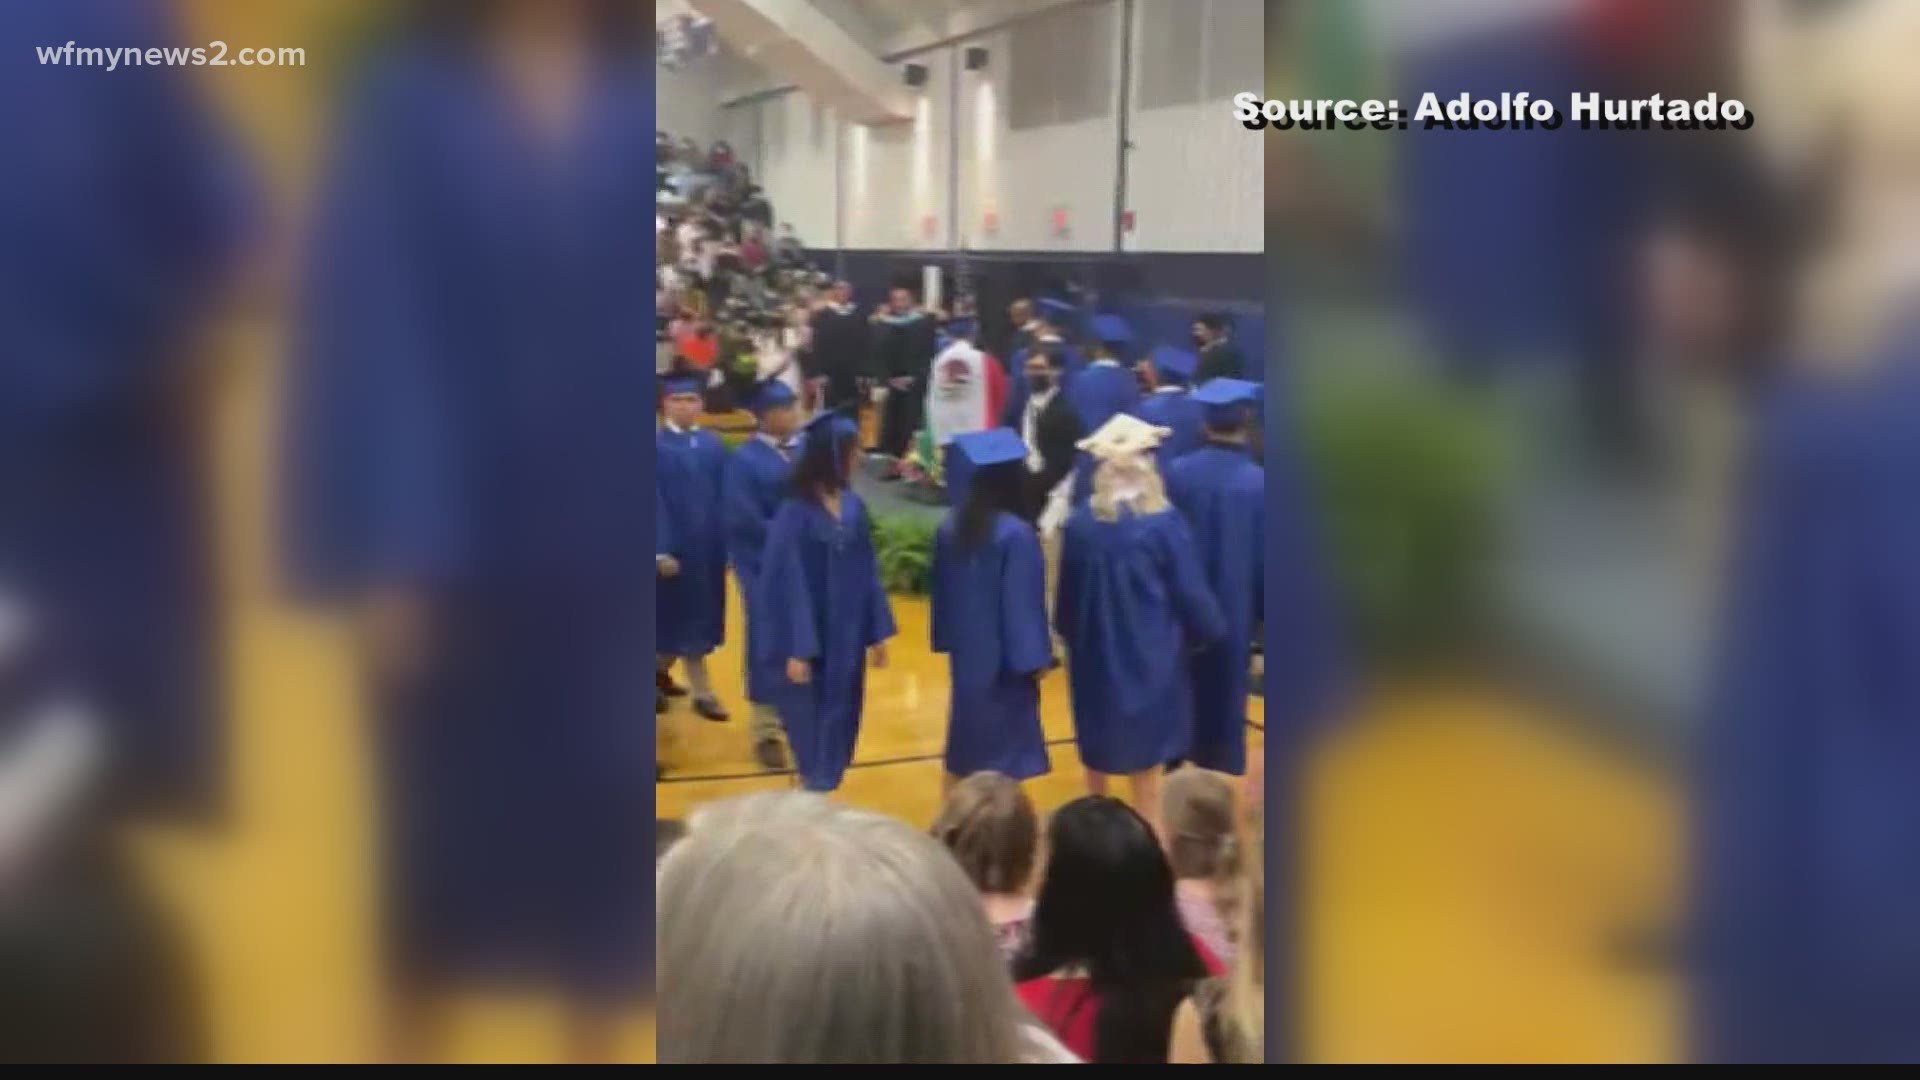 The school district responded after the student wore a Mexican flag during graduation.